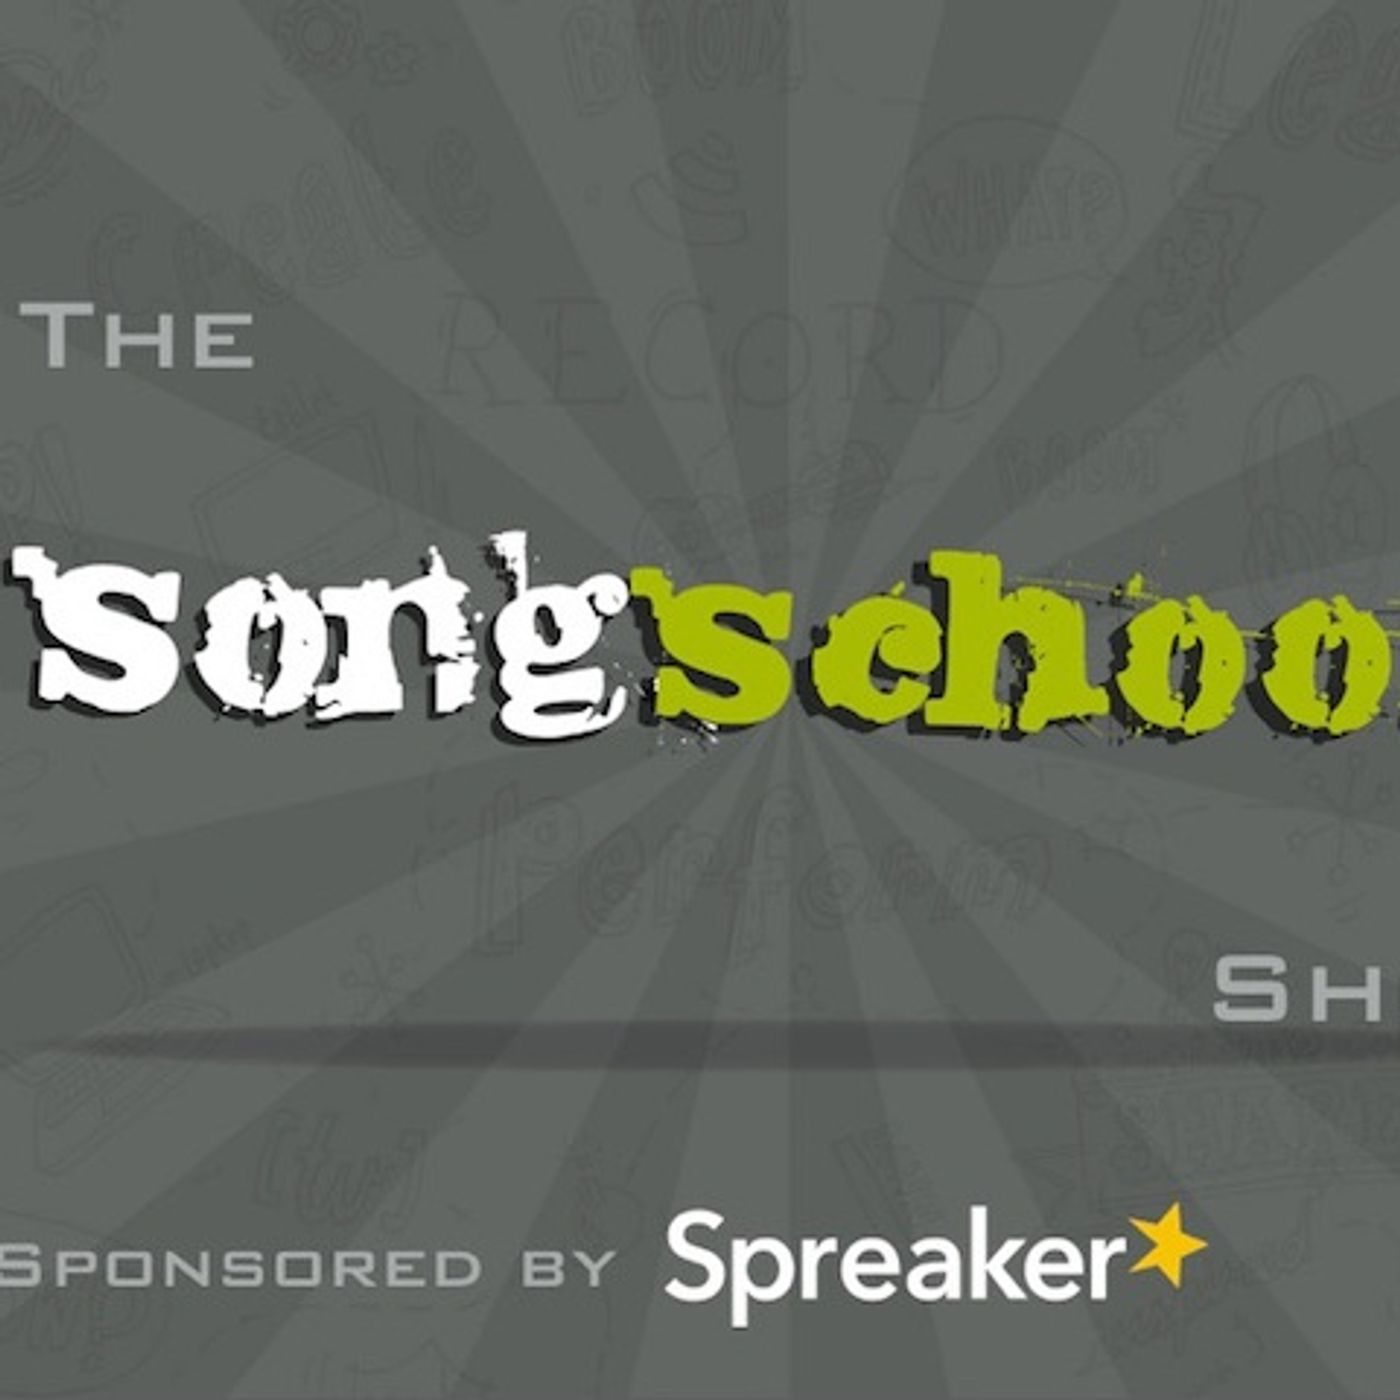 The Songschool Show - Our Lady of Mercy Secondary School